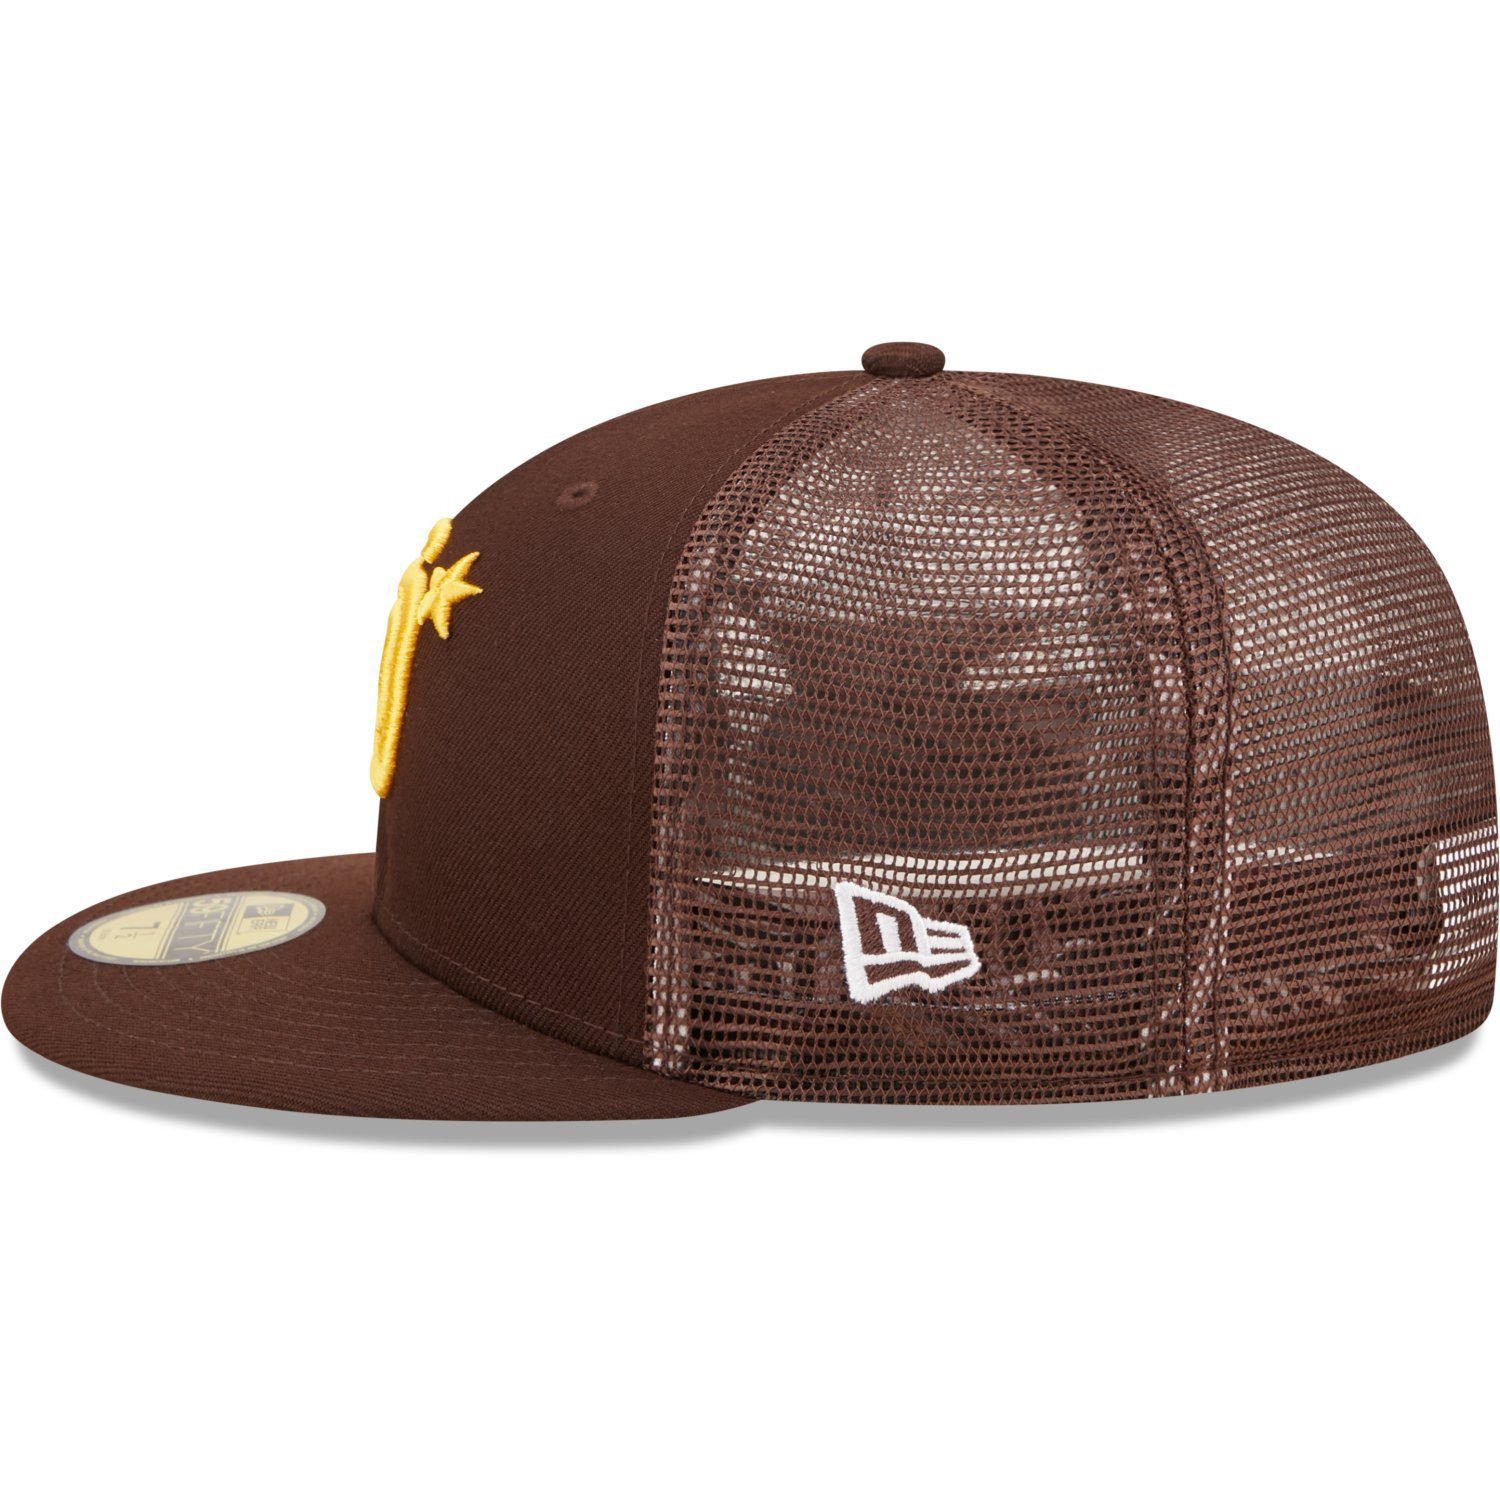 New Era Cap ALLSTAR Padres Fitted Diego 59Fifty GAME San